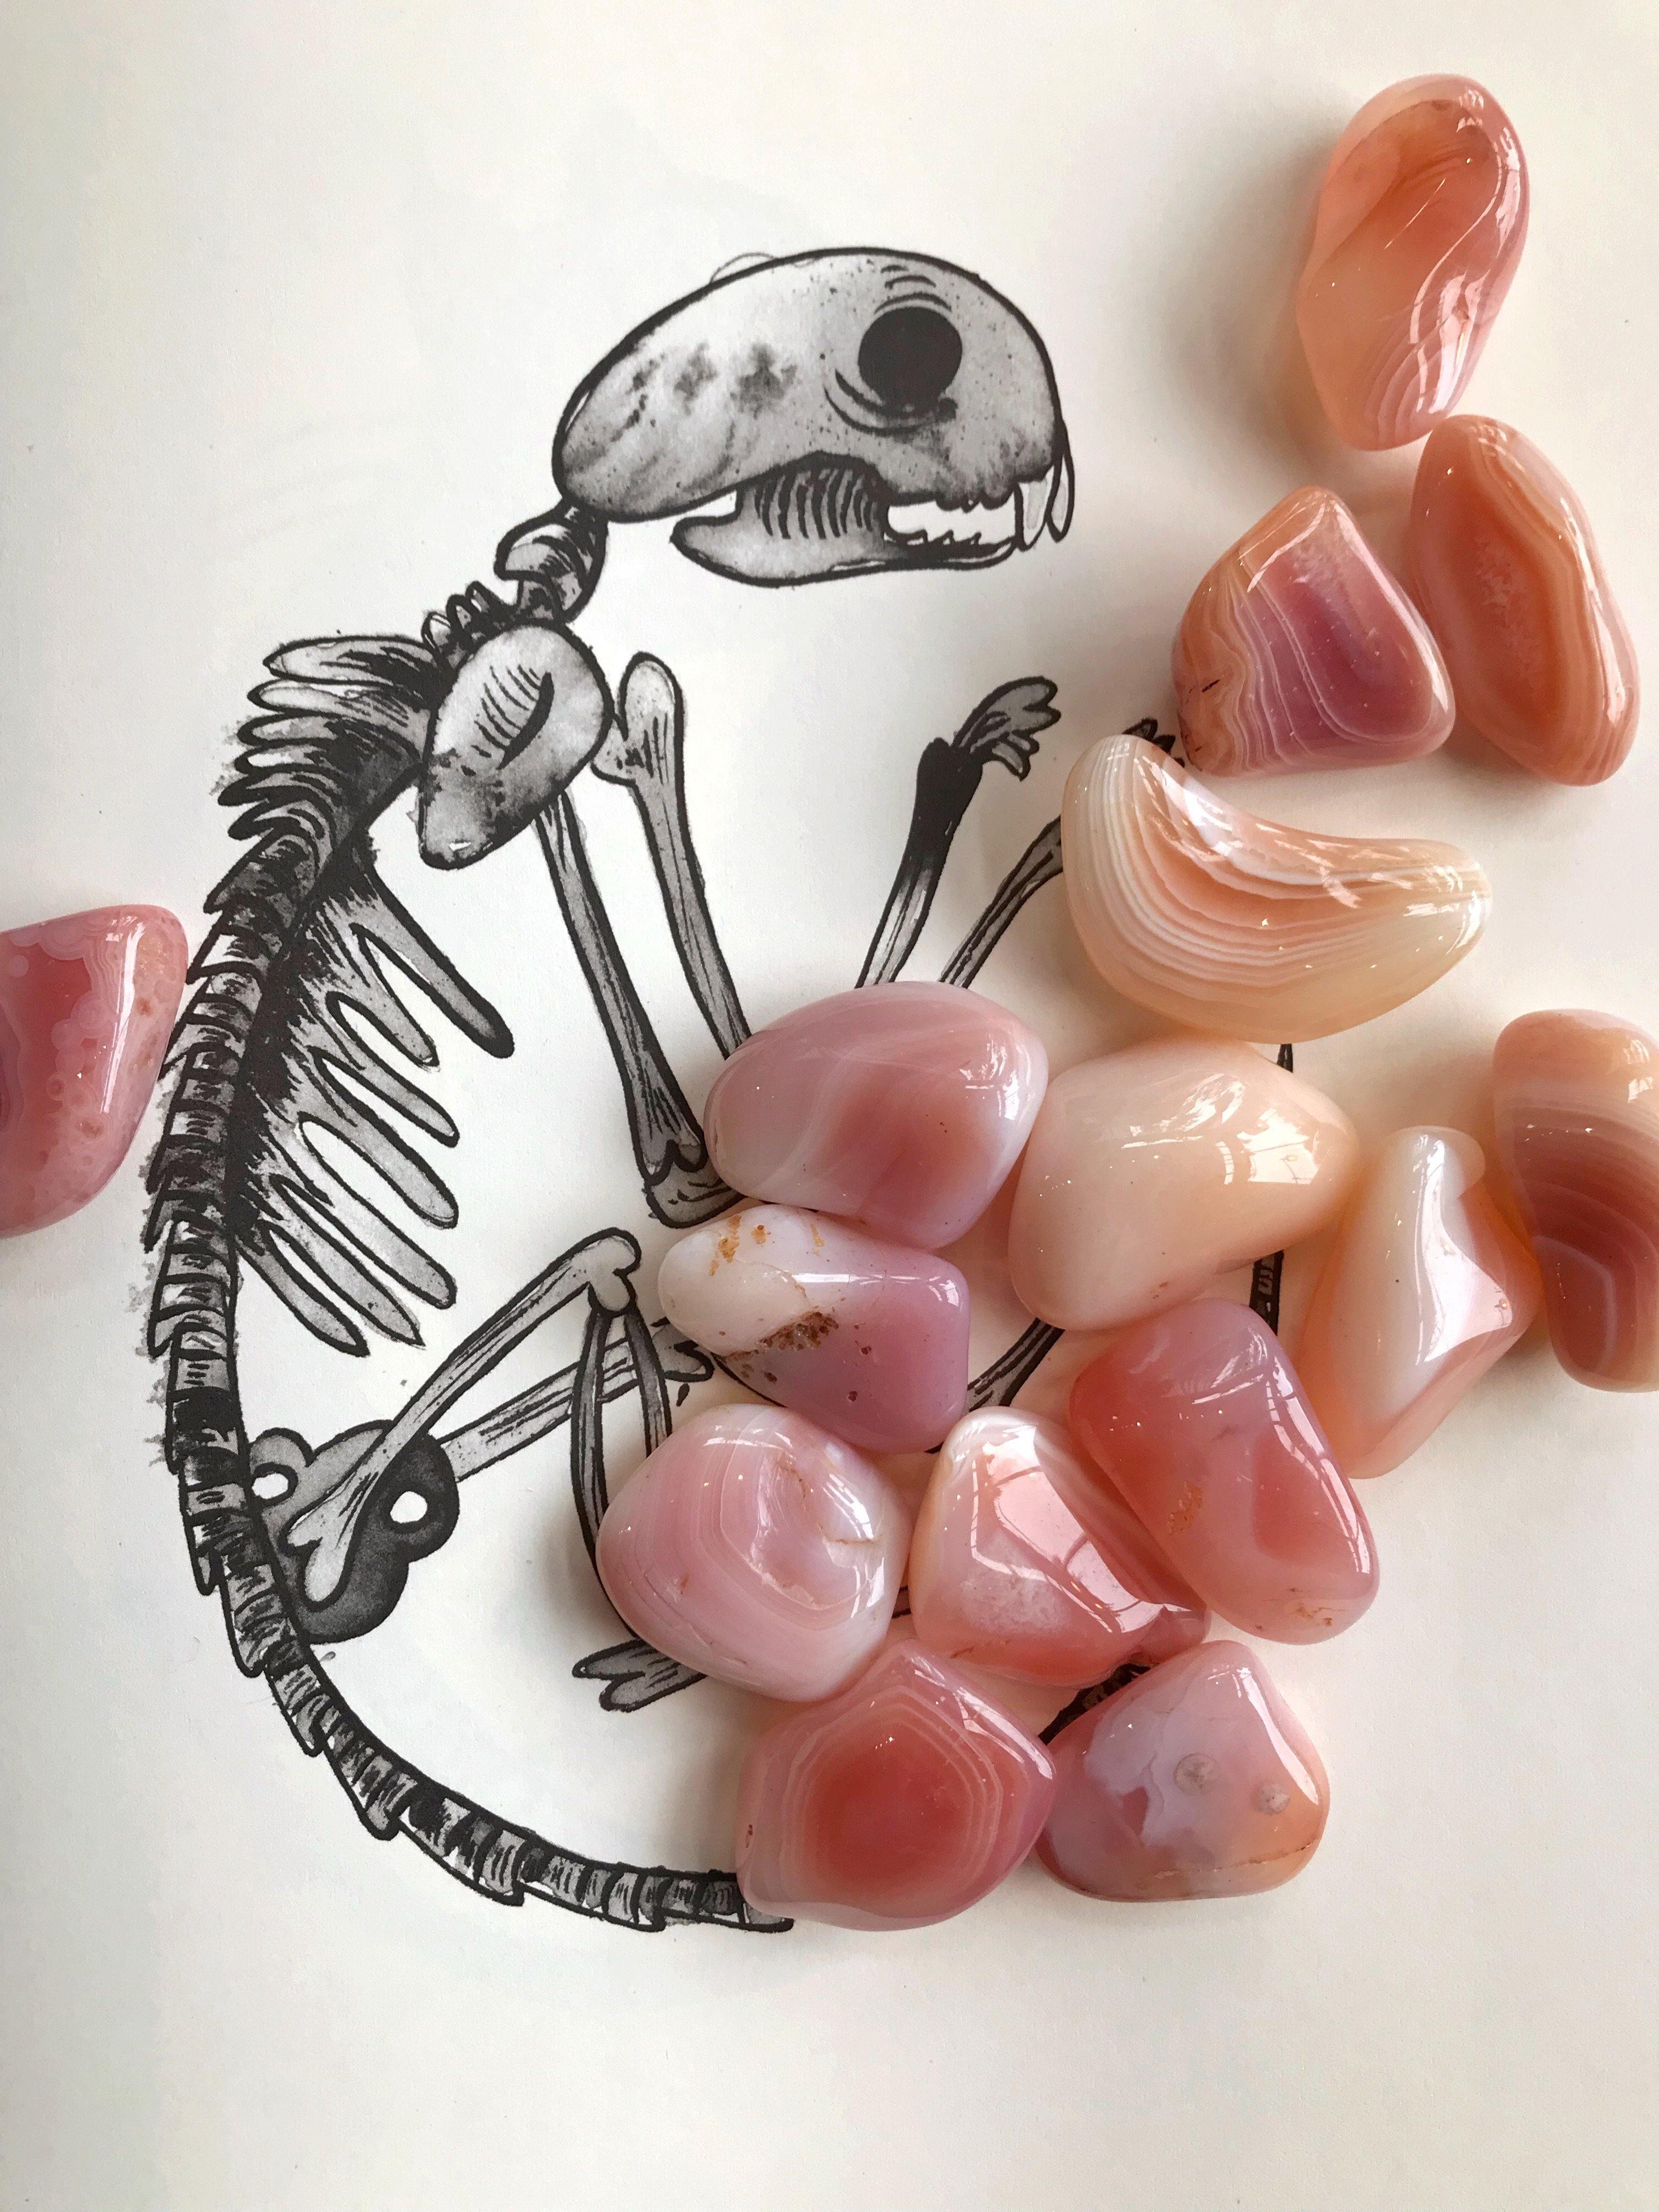 Pink Apricot Agate (Pink Carnelian) - Tumbled - Keven Craft Rituals